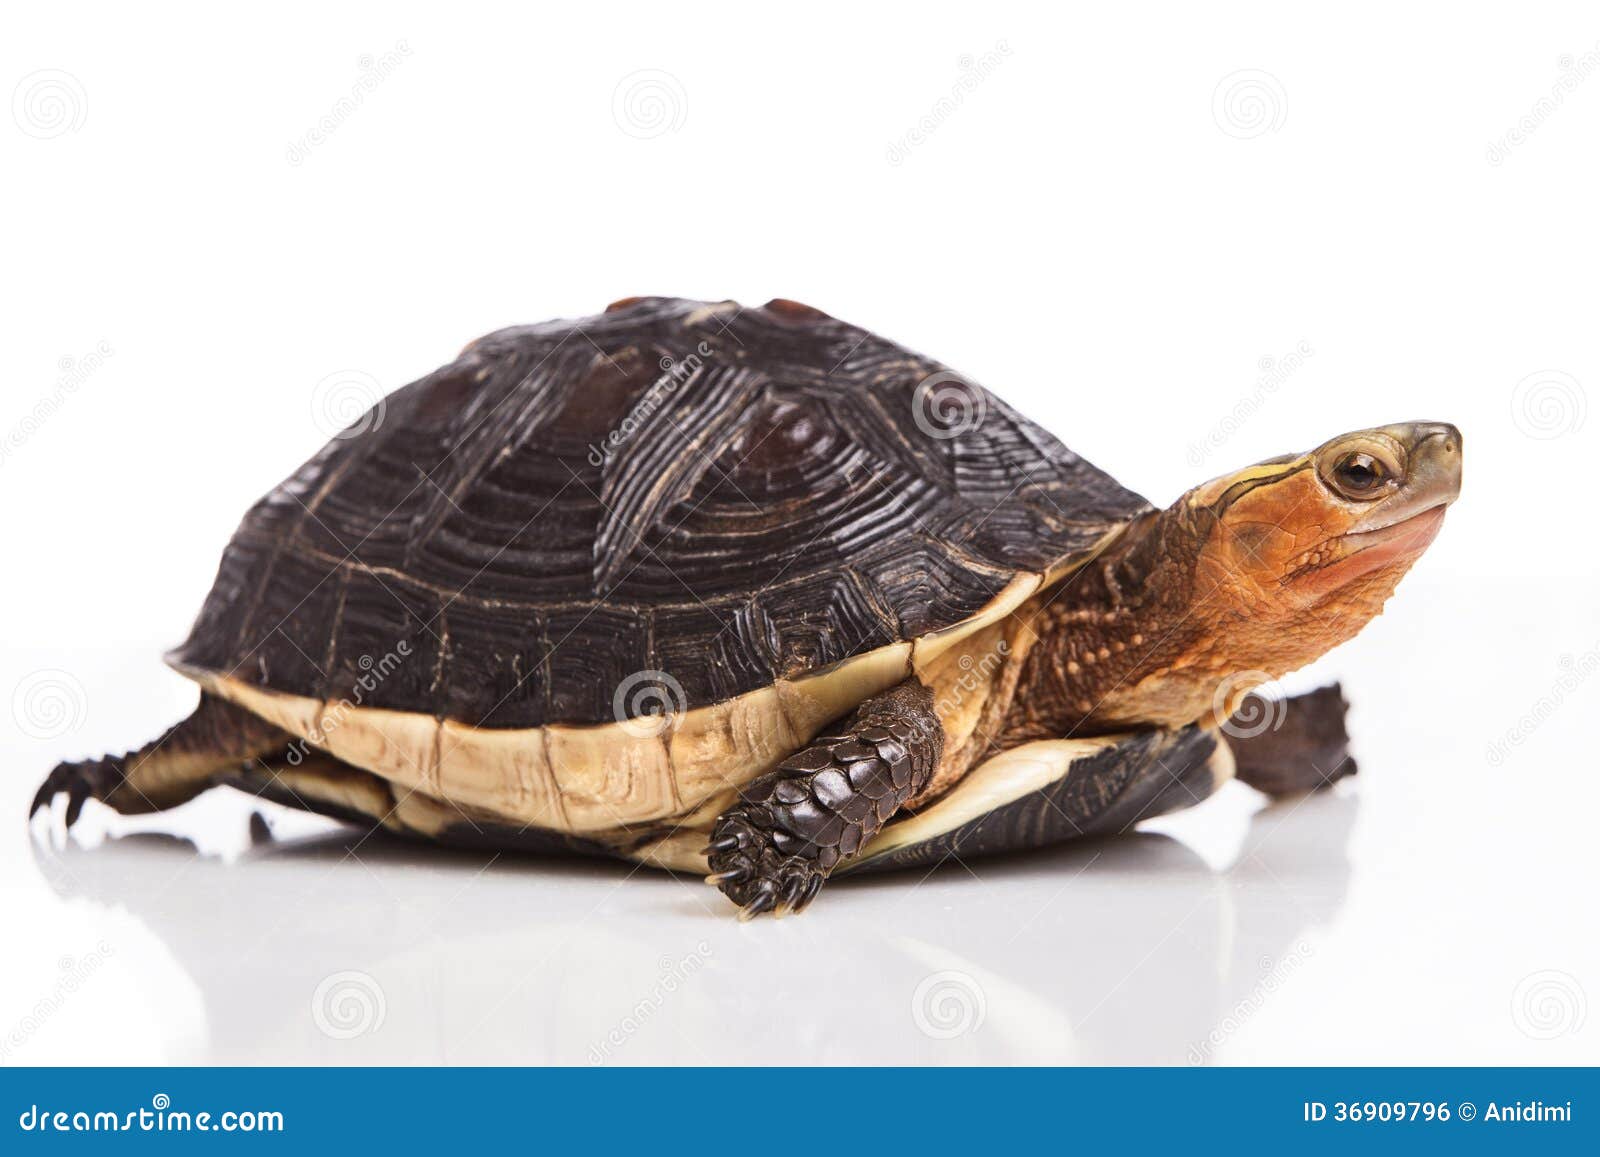 Chinese box turtle stock photo. Image of active, nature - 36909796